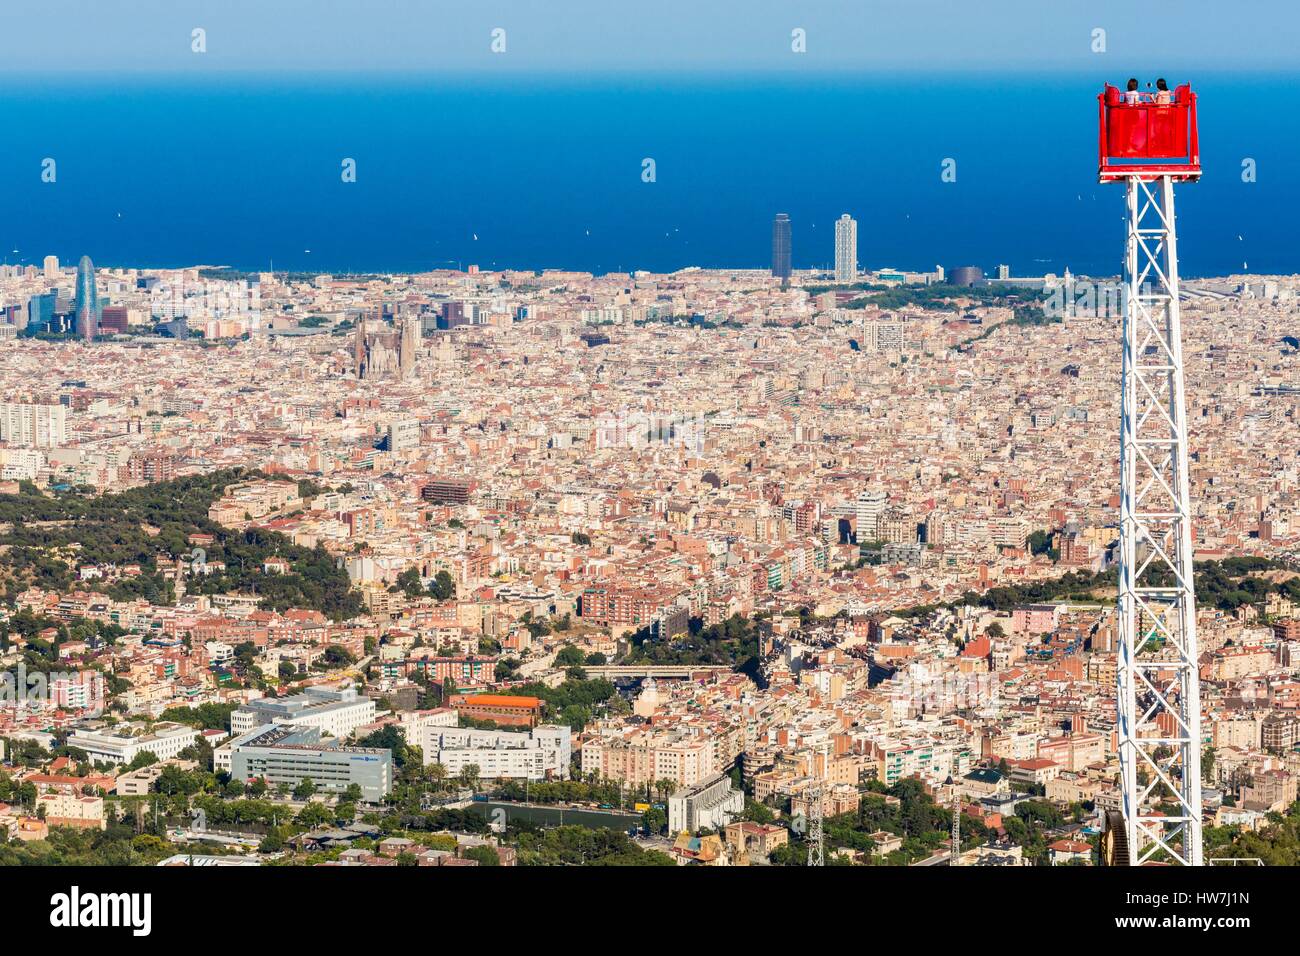 Spain, Catalonia, Barcelona, view from the amusement park Tibidabo (Serra de Collserola), founded in 1901 on the Eixample district, La Barceloneta and the old city and the Agbar Tower Stock Photo